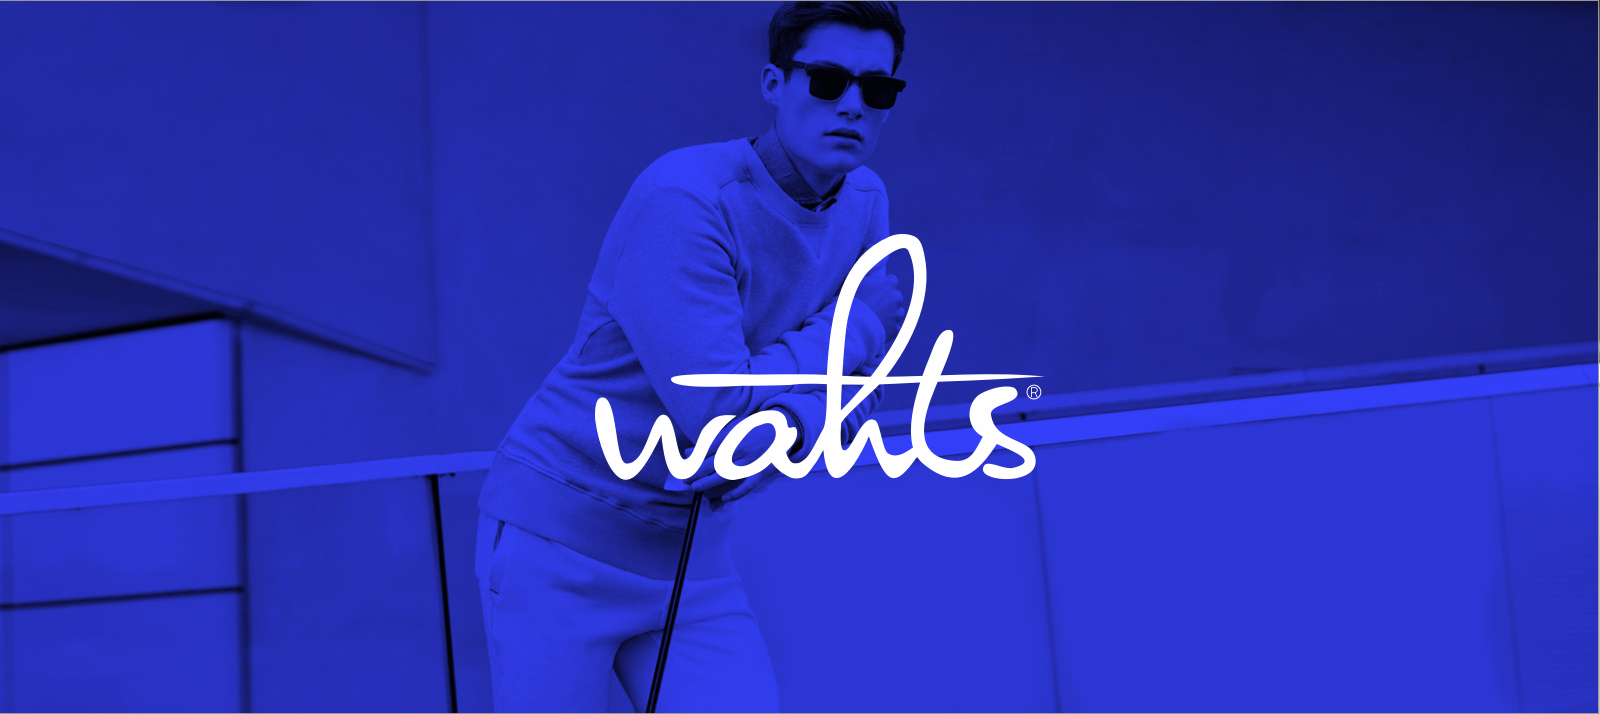  logo/corporate identity / packaging and webdesign for wahts, the underwear maker 